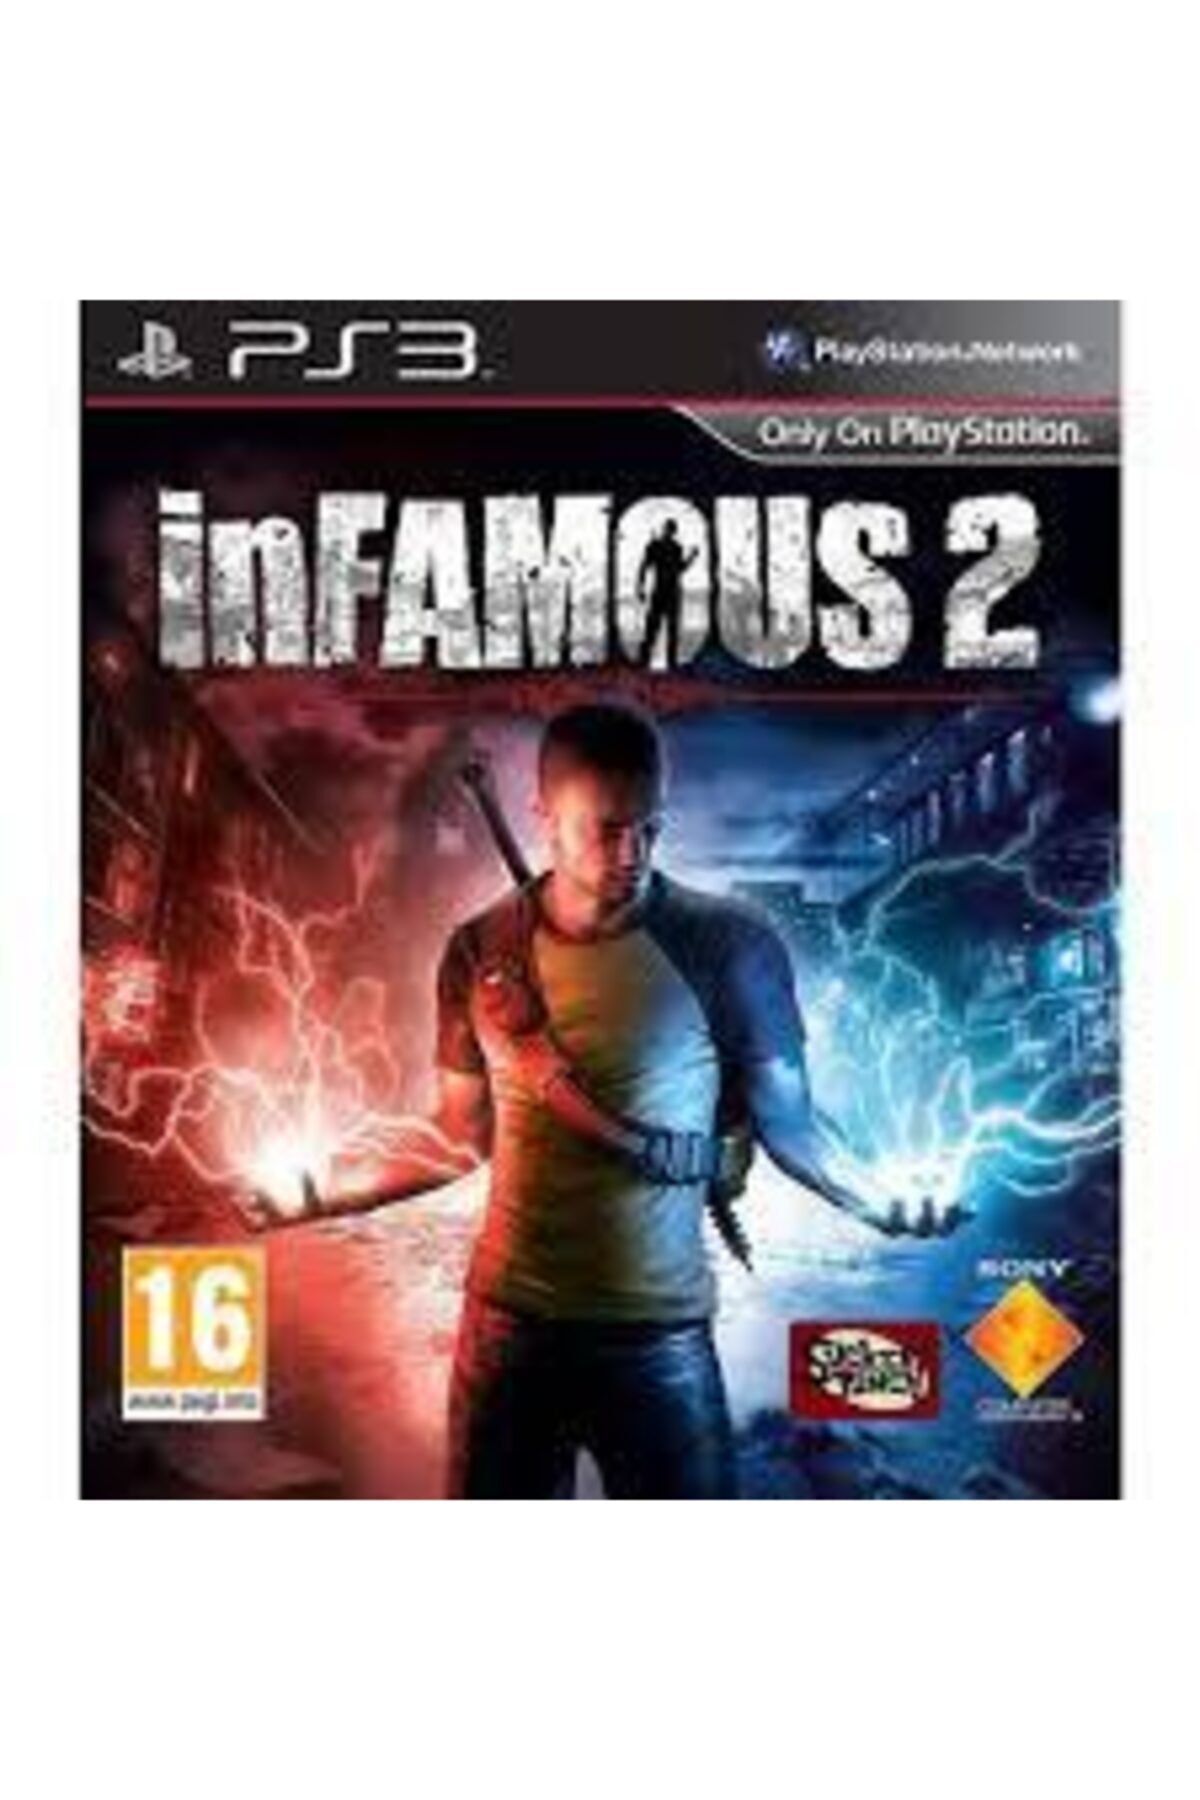 Pegia Ps3 In Infamous 2